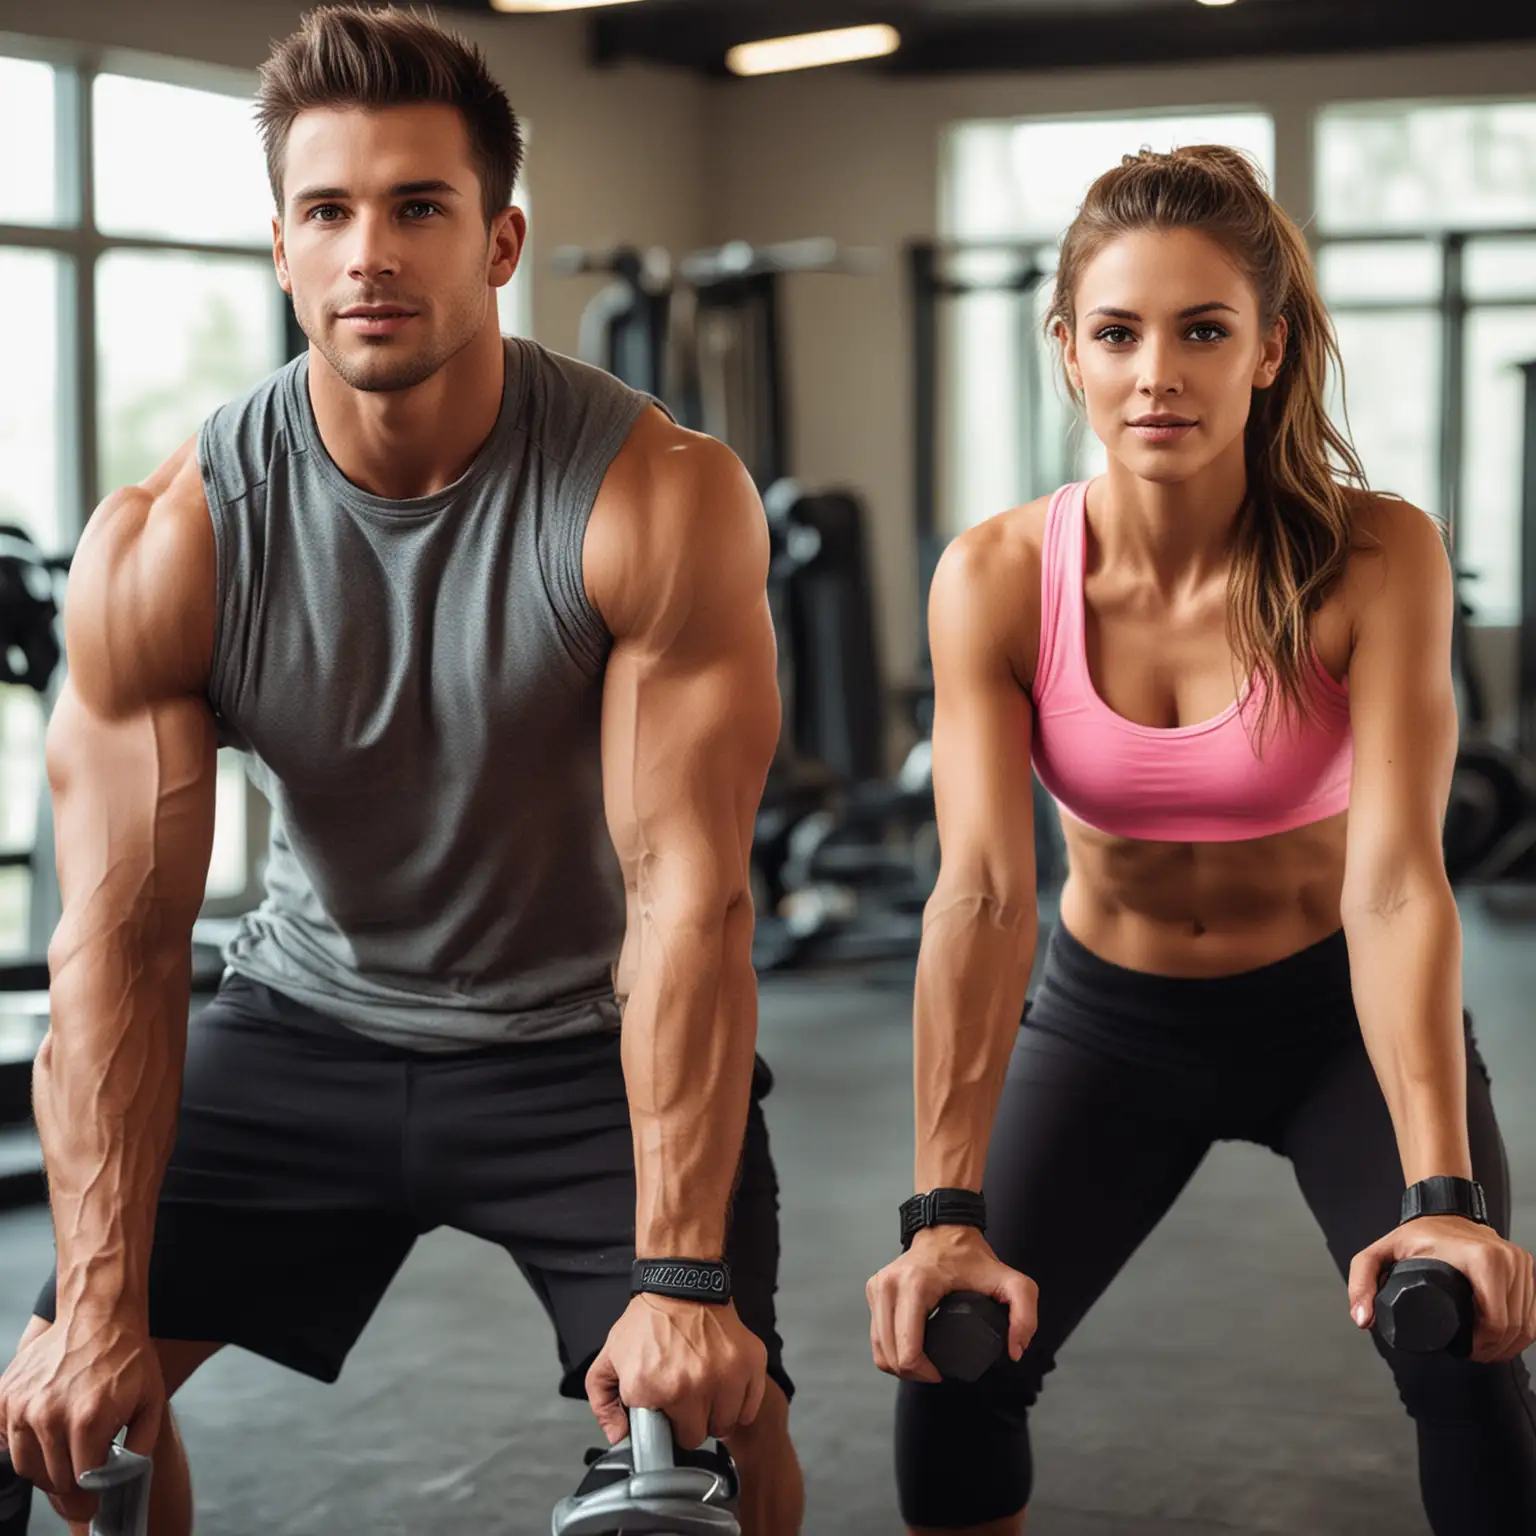  attractive couple working out together

